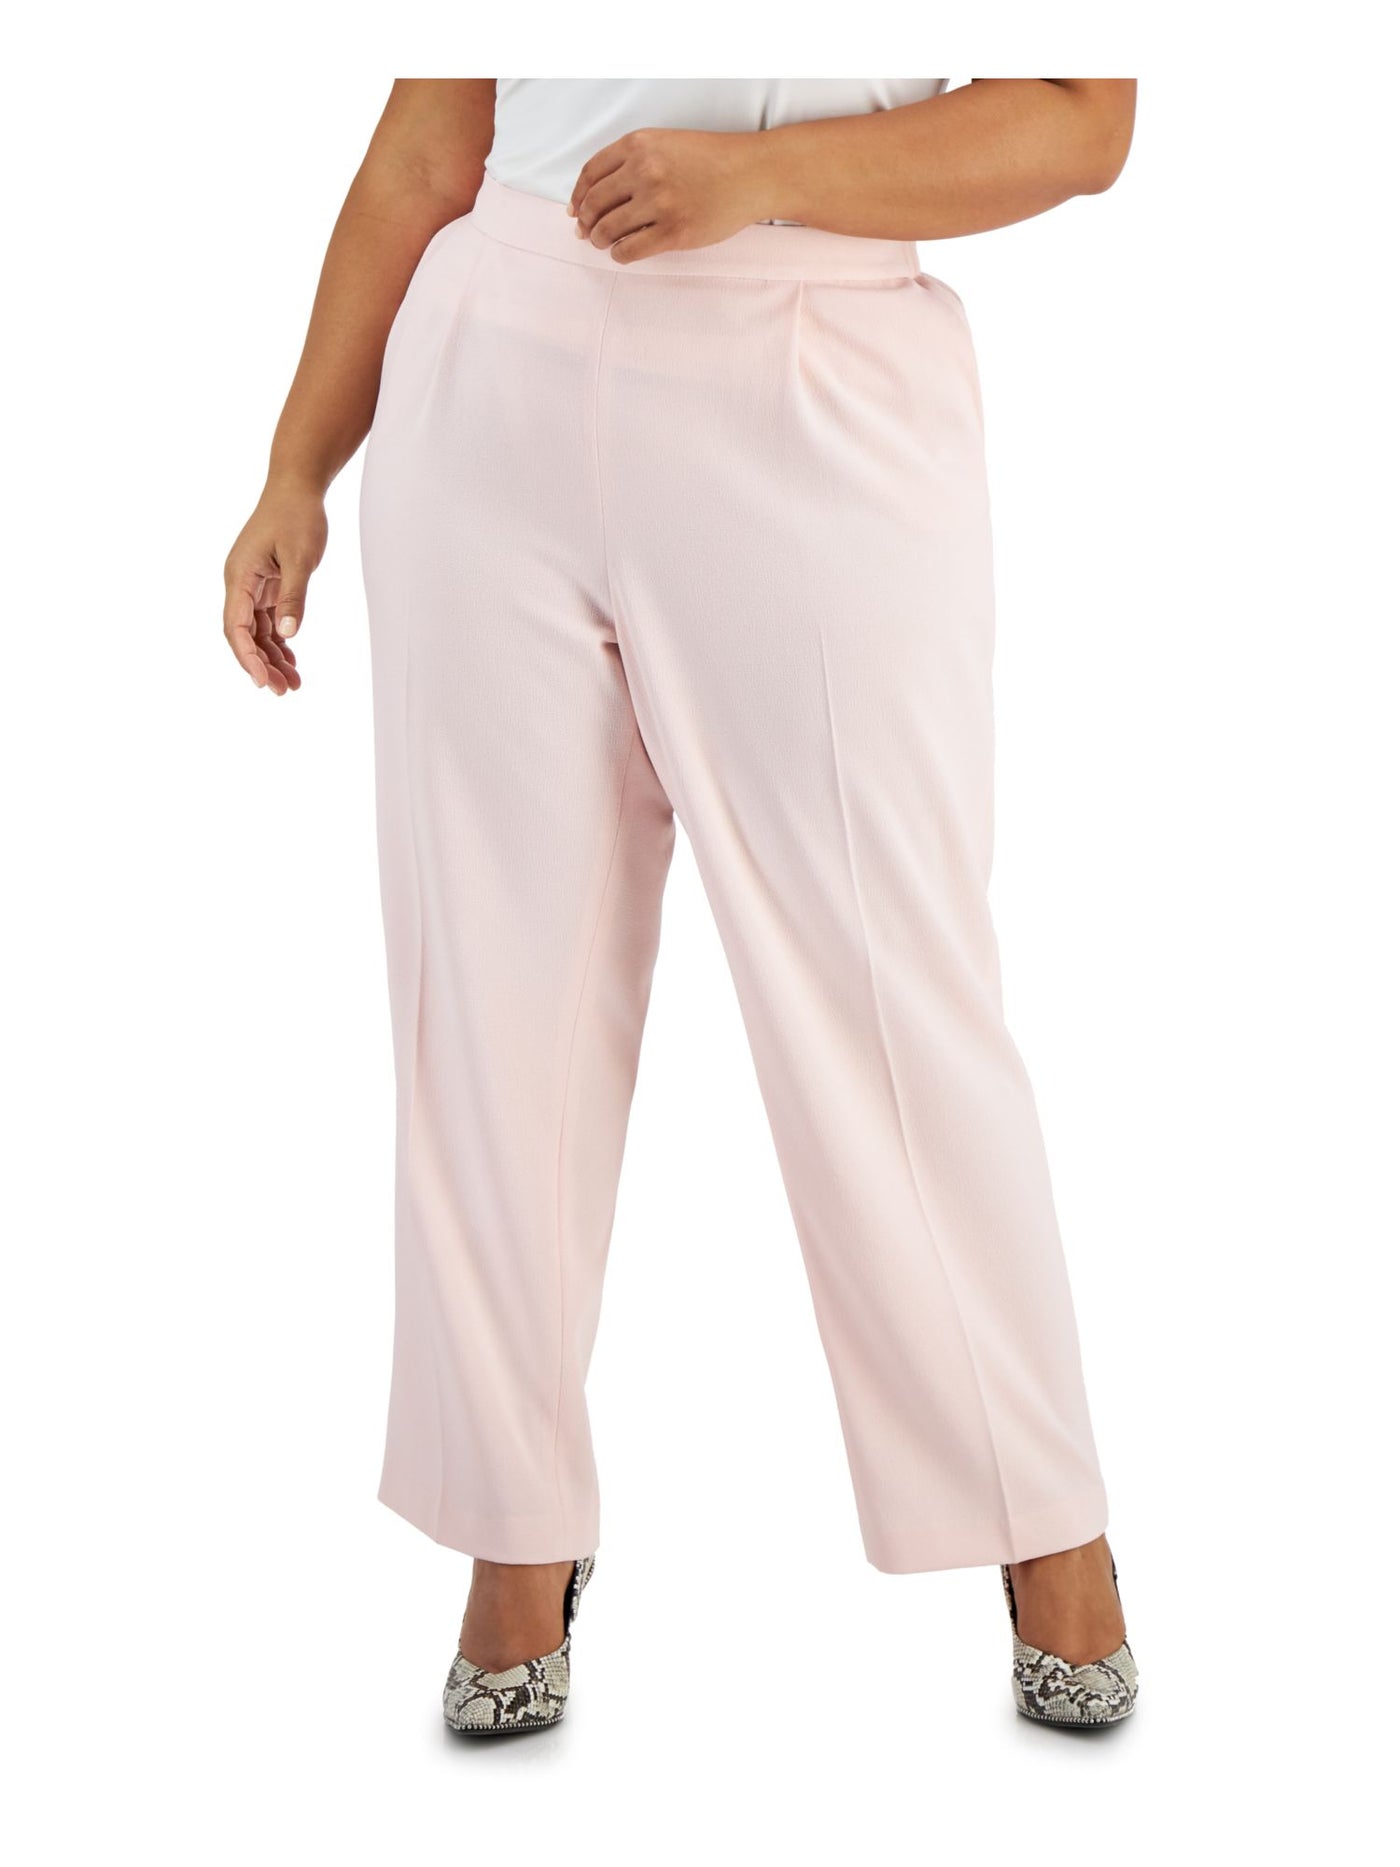 BAR III Womens Pink Textured Pocketed Elastic Waist Pull On Highrise Wear To Work Straight leg Pants Plus 3X